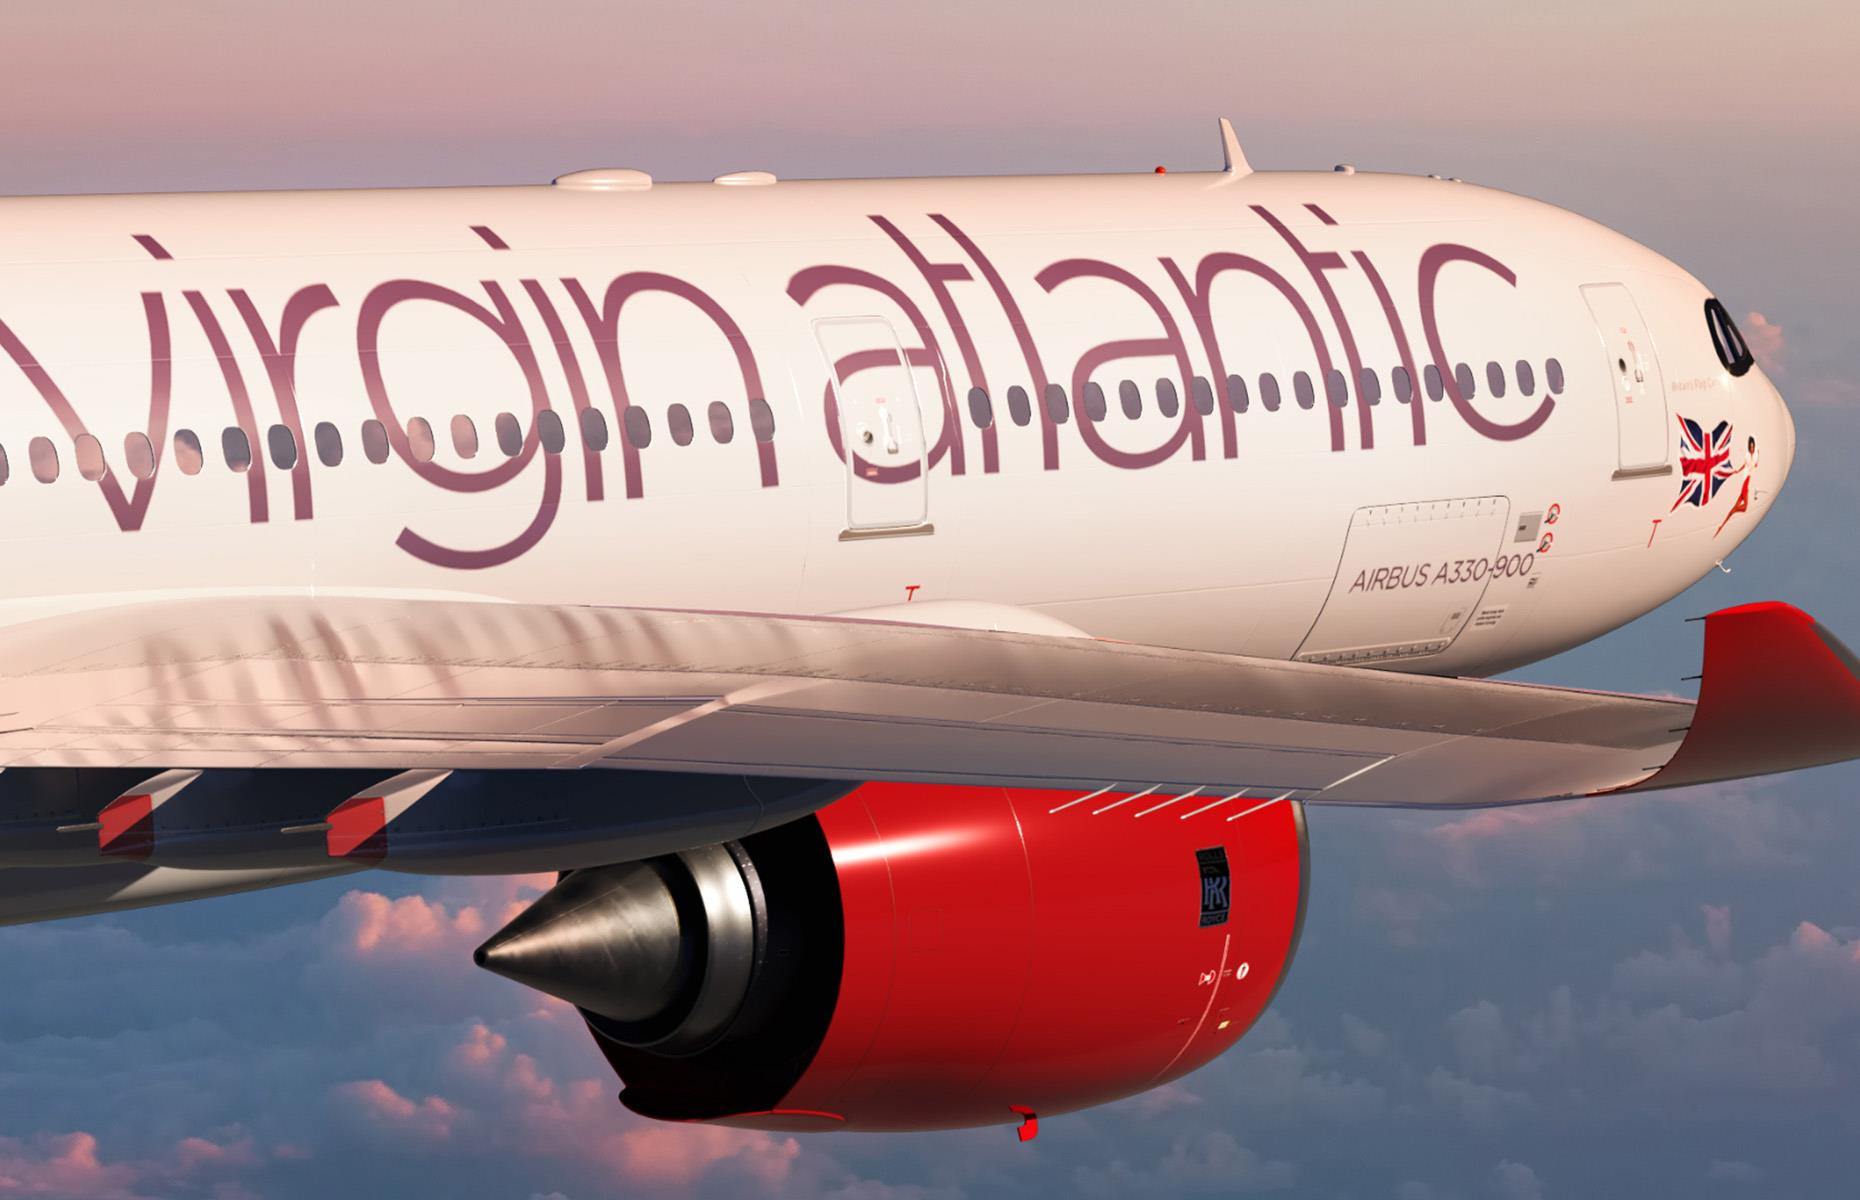 <p>In July 2022, Virgin Atlantic unveiled the swanky cabins onboard its new <a href="https://corporate.virginatlantic.com/gb/en/media/press-releases/revealing-airbus-a330neo.html#">Airbus A330neo</a>, which is set to take its first passengers to Boston, USA, in early October. The latest addition to the VA fleet, the state-of-the-art aircraft, boasting a wingspan of 210 feet (64m), will be one of the most energy-efficient models in the sky, as it flies further and faster than its rivals. Onboard, it promises a 'premium, personalised experience for every customer'...</p>